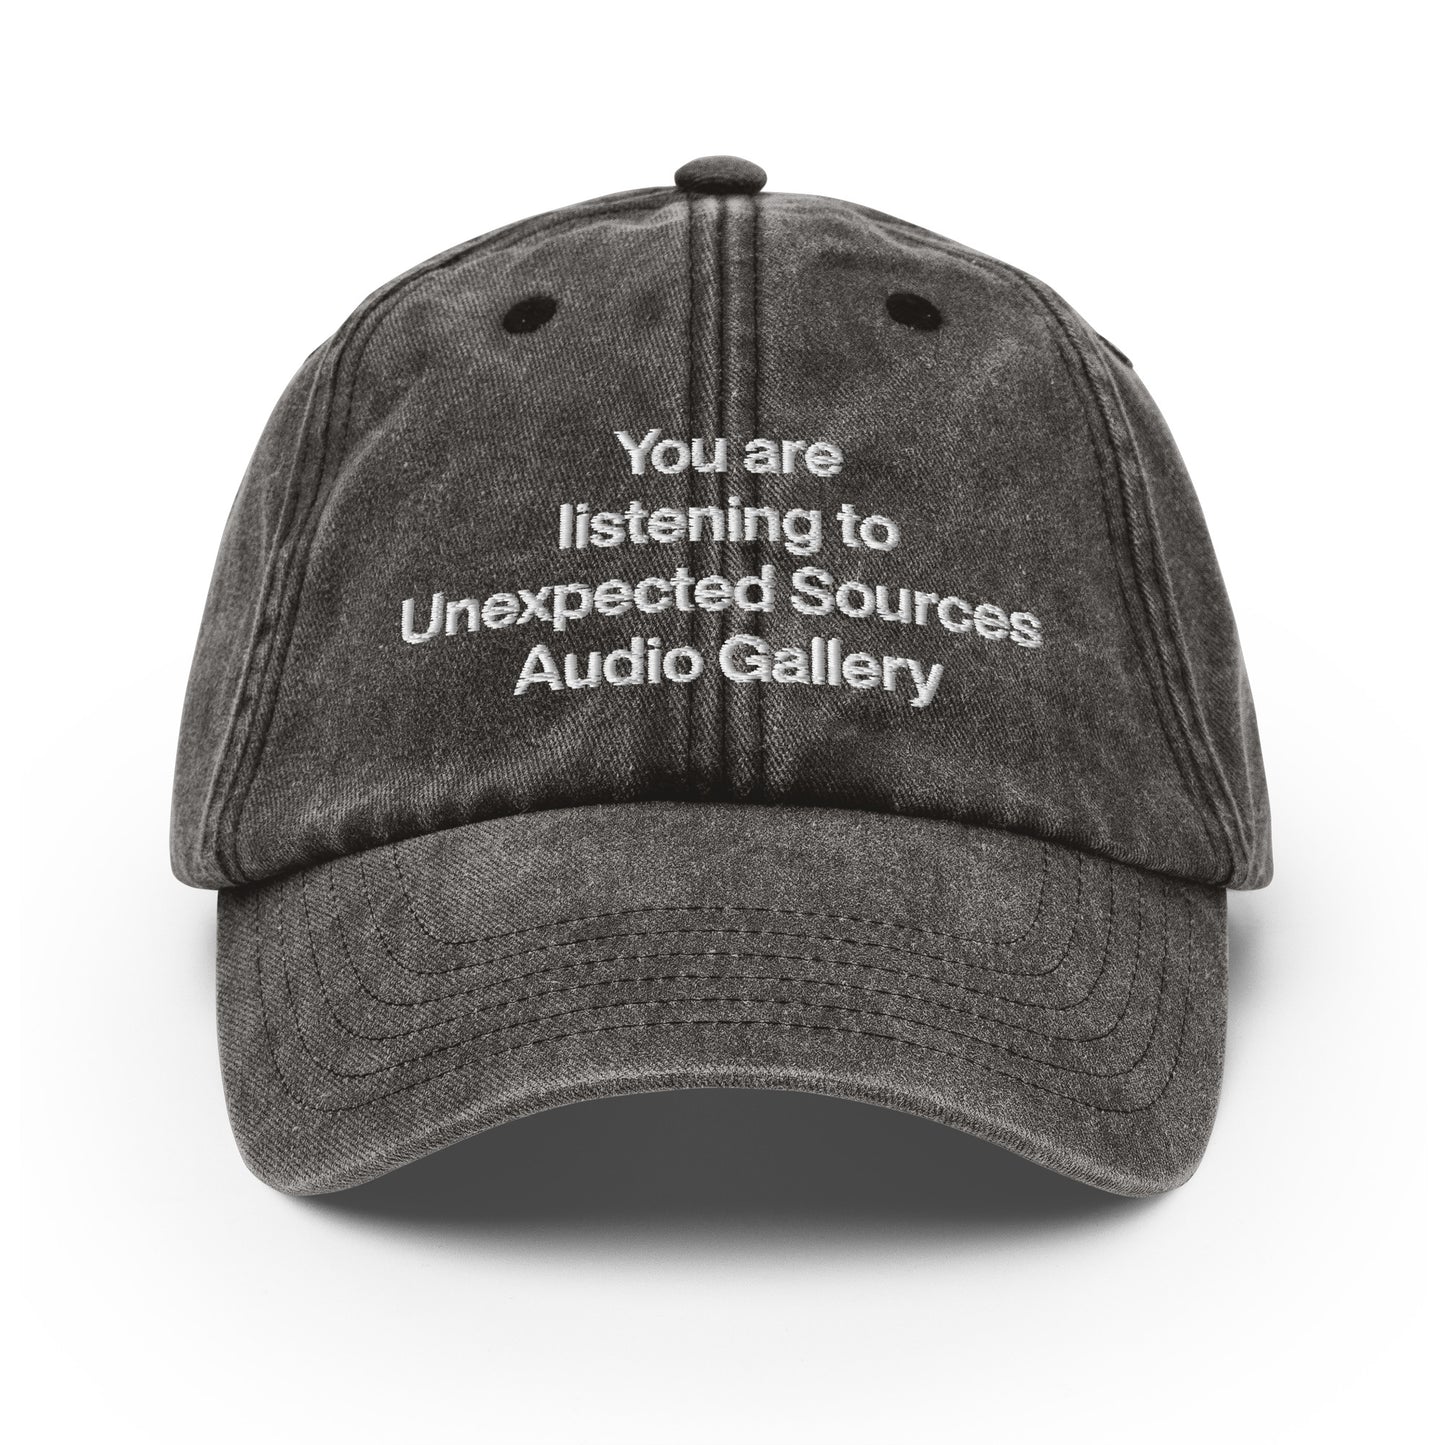 You are listening to Unexpected Sources Audio Gallery _ jingle cap _ 007